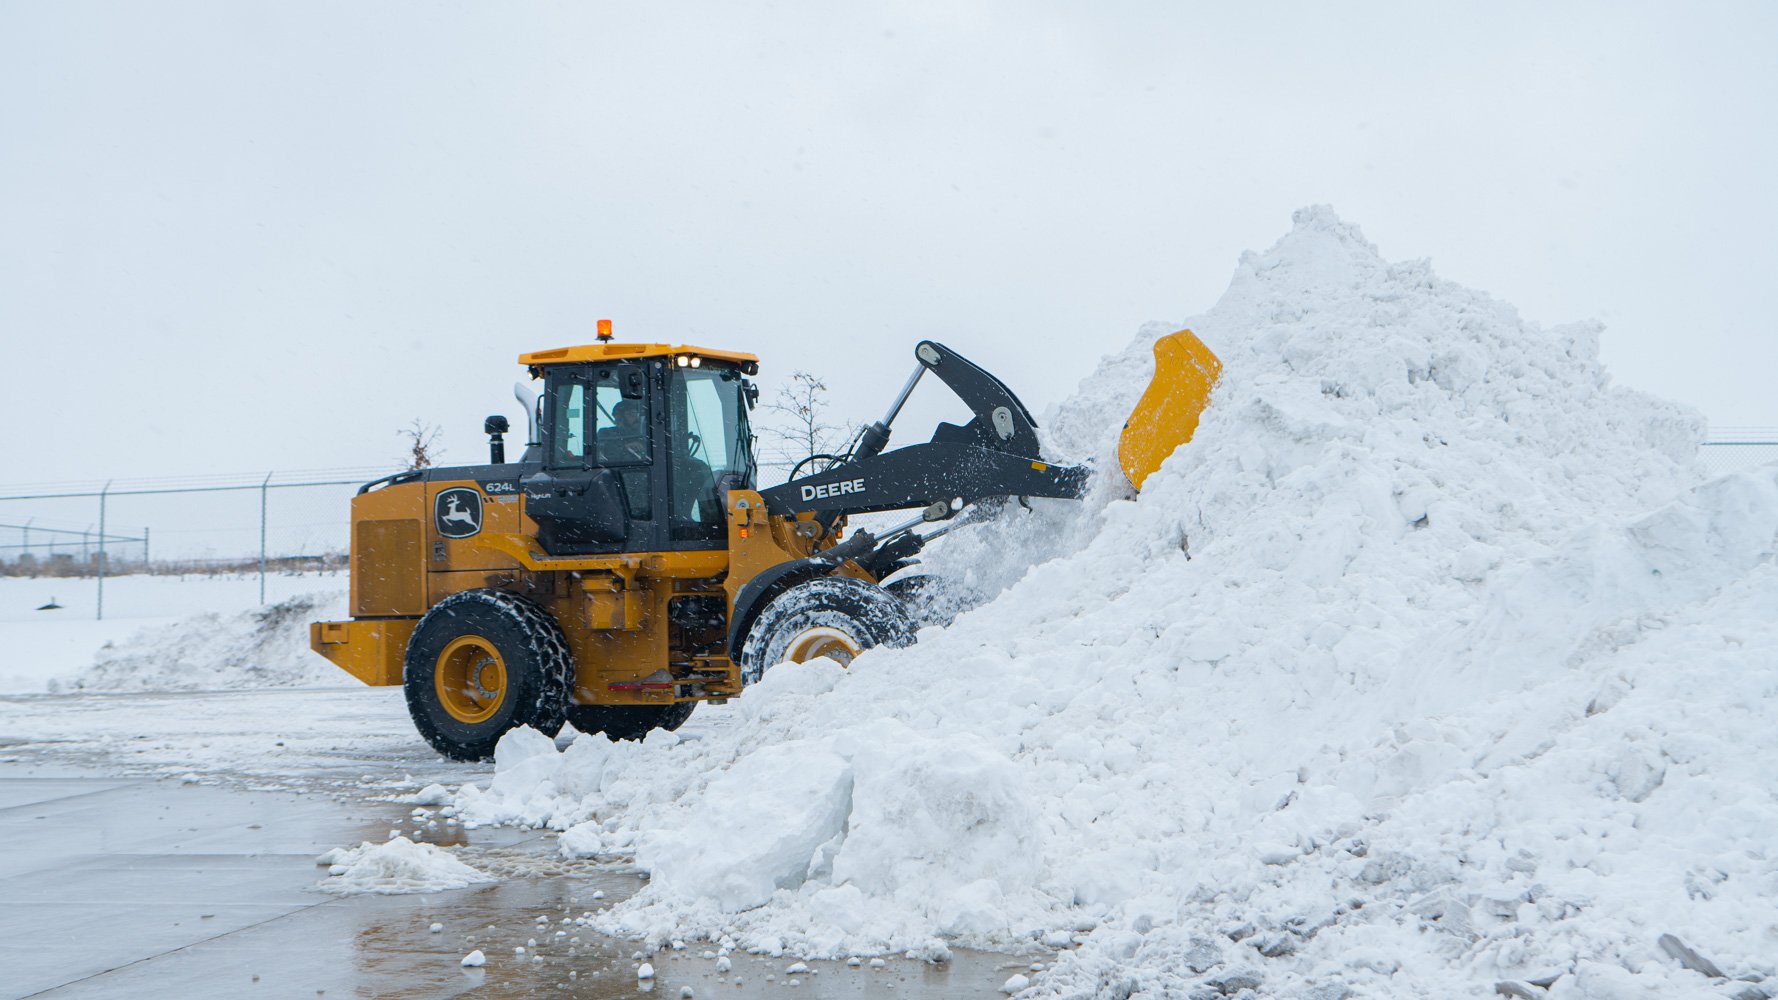 commercial snow removal plow loader moving a large pile of snow at an industrial warehouse parking lot